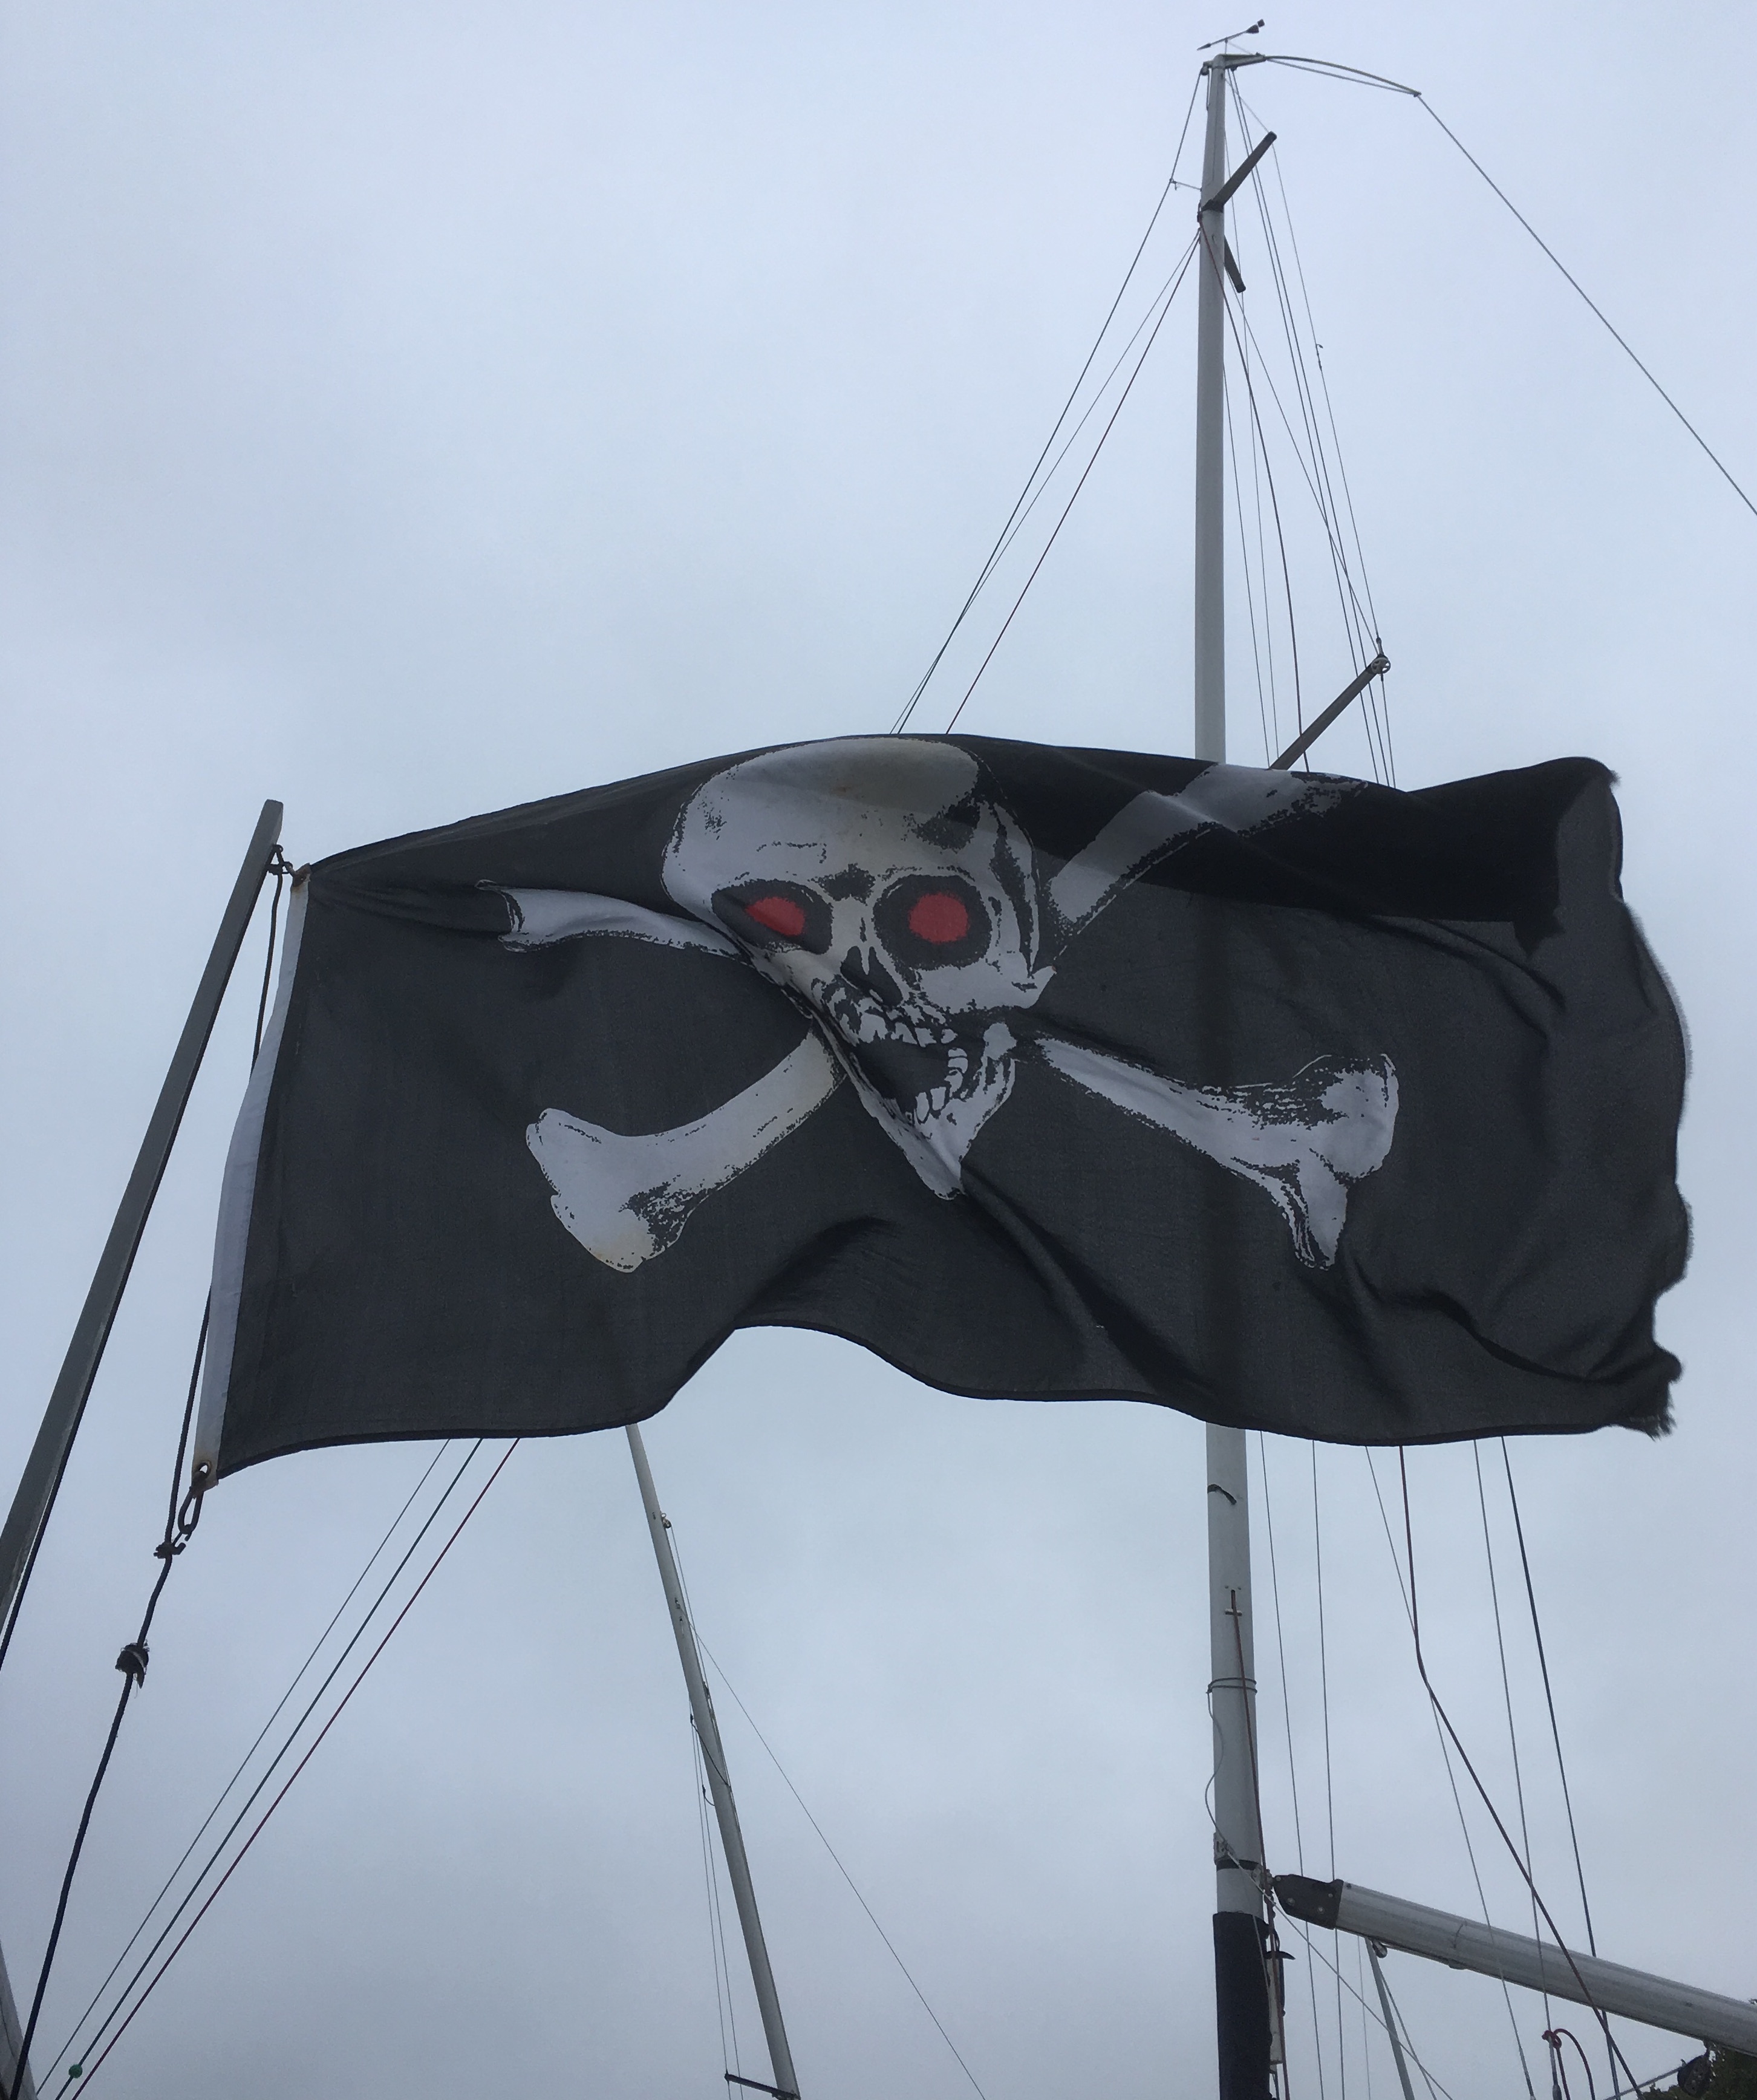 Piracy – black hearted or wholehearted?